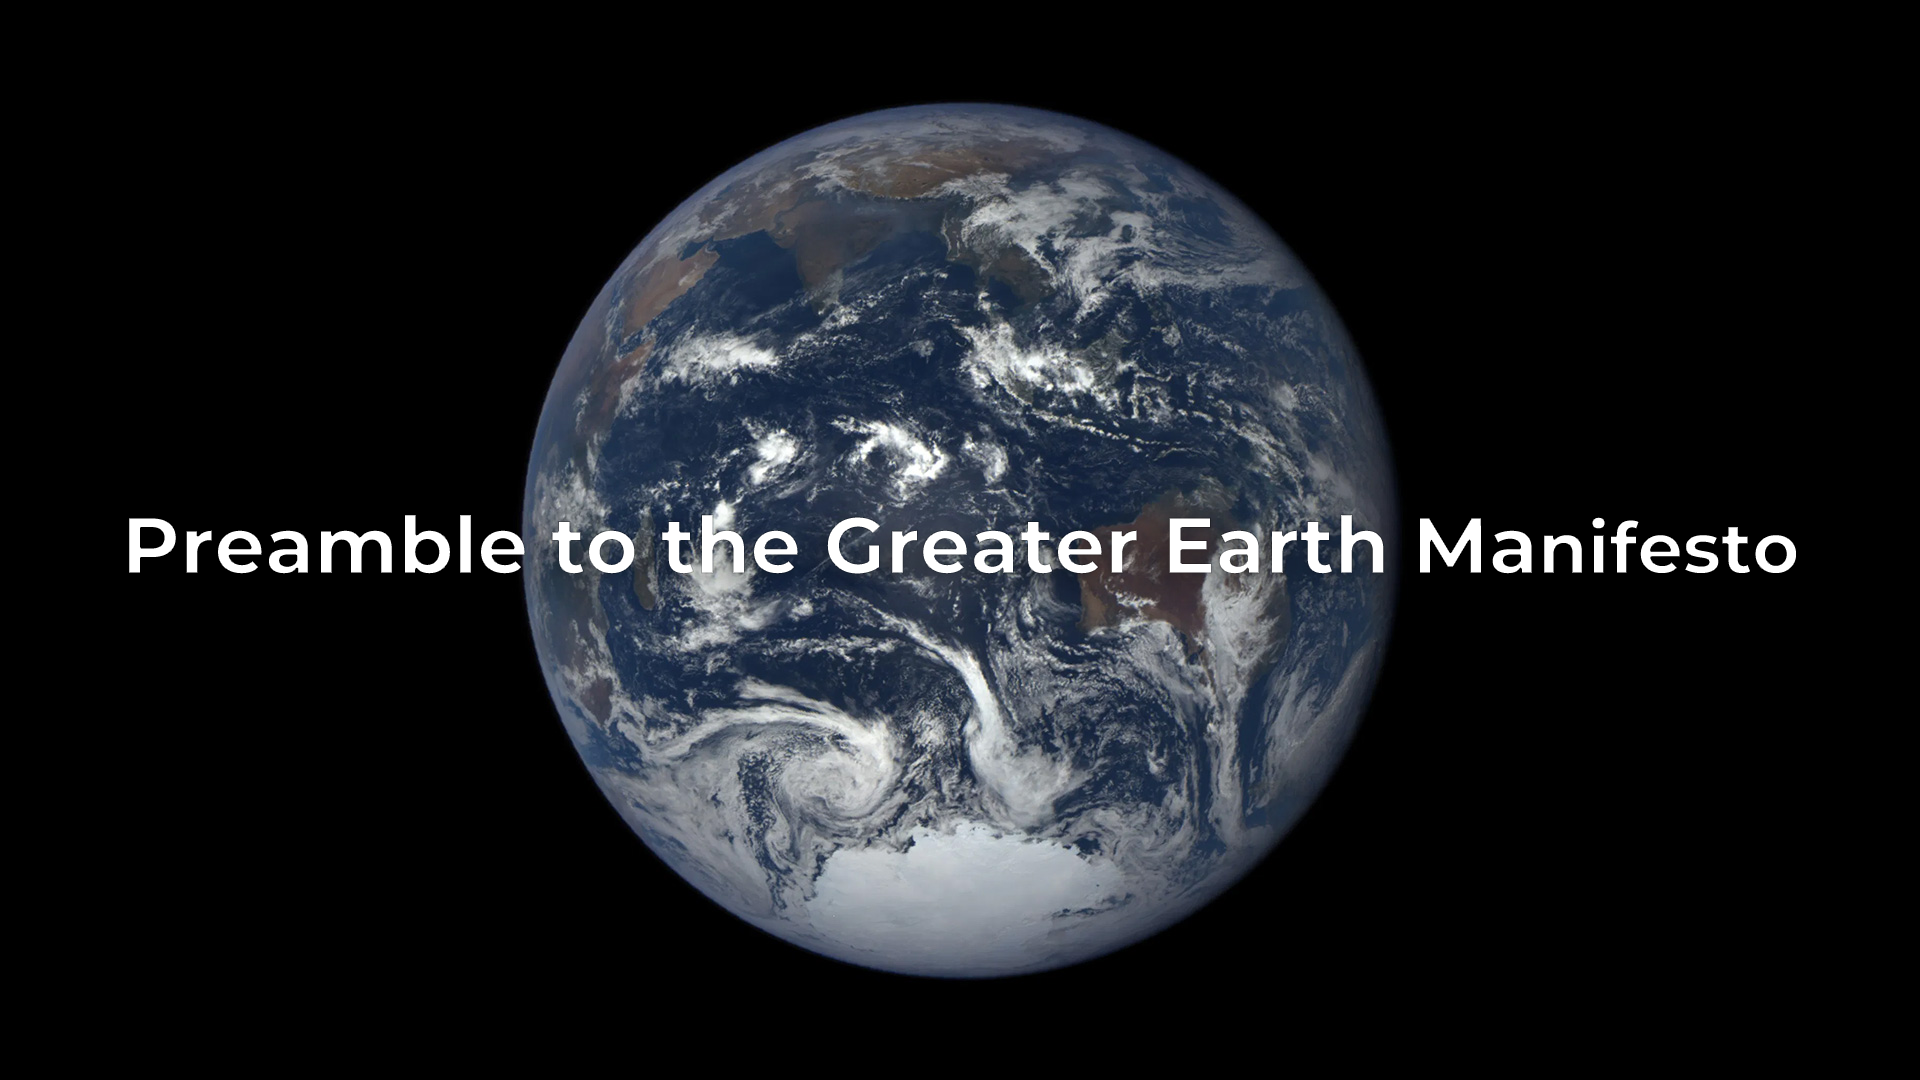 Preamble to the Greater Earth Manifesto